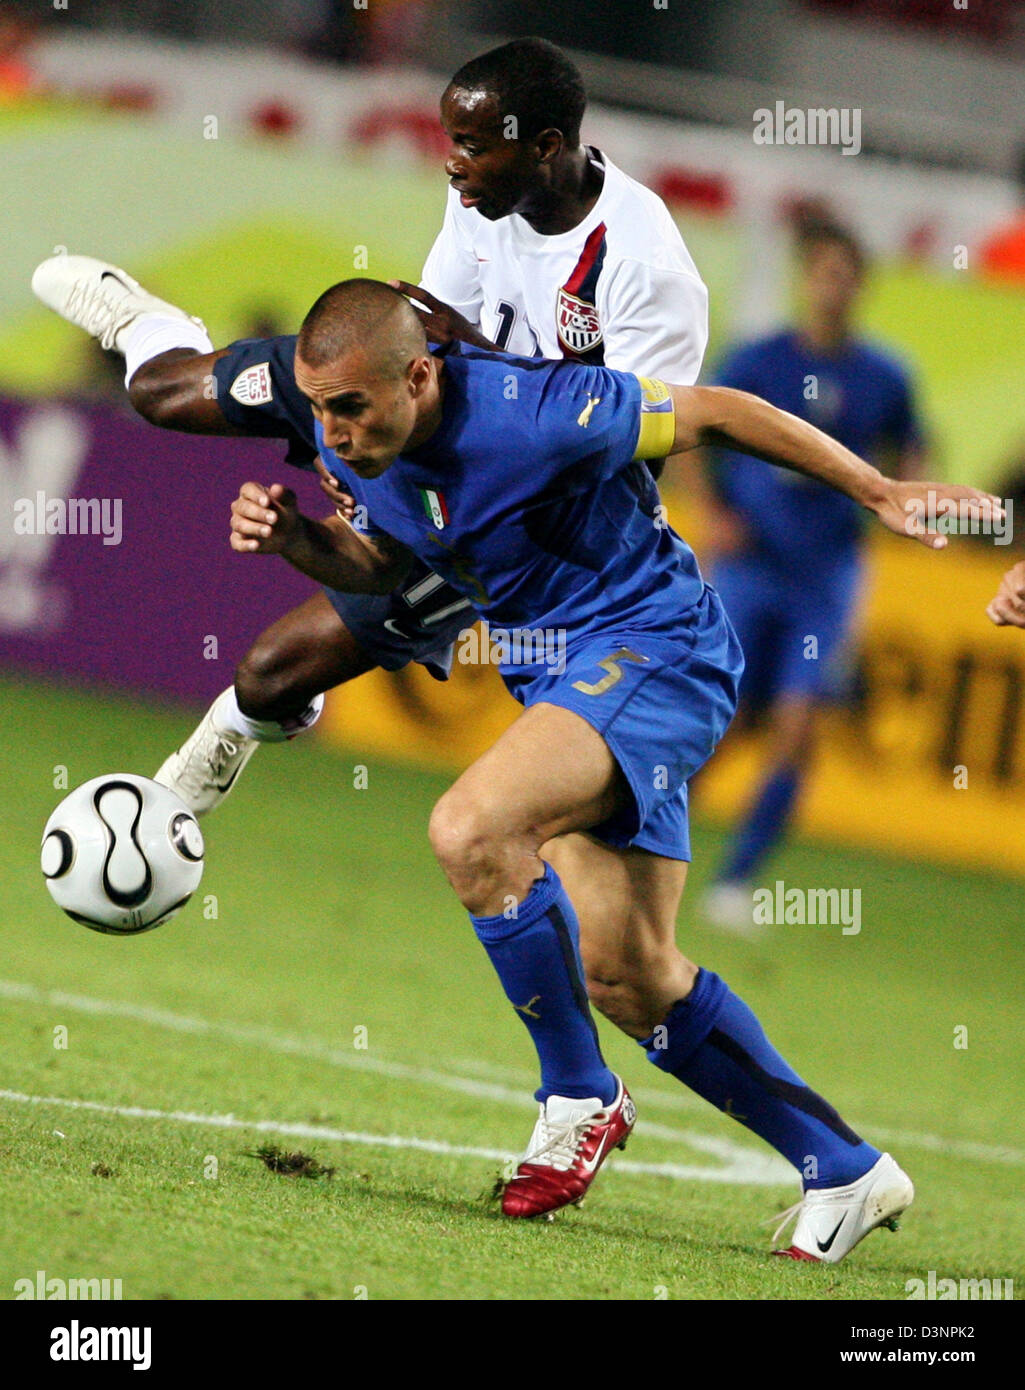 US player DaMarcus Beasley (up) and ItalyÂs Fabio Cannavaro fight for the ball during the group E match of the 2006 FIFA World Cup between Italy and the USA in Kaiserslautern, Germany, Saturday 17 June 2006. EPA/OLIVIER MATTHYS +++ Mobile Services OUT +++ Please also refer to FIFA's Terms and Conditions. Stock Photo